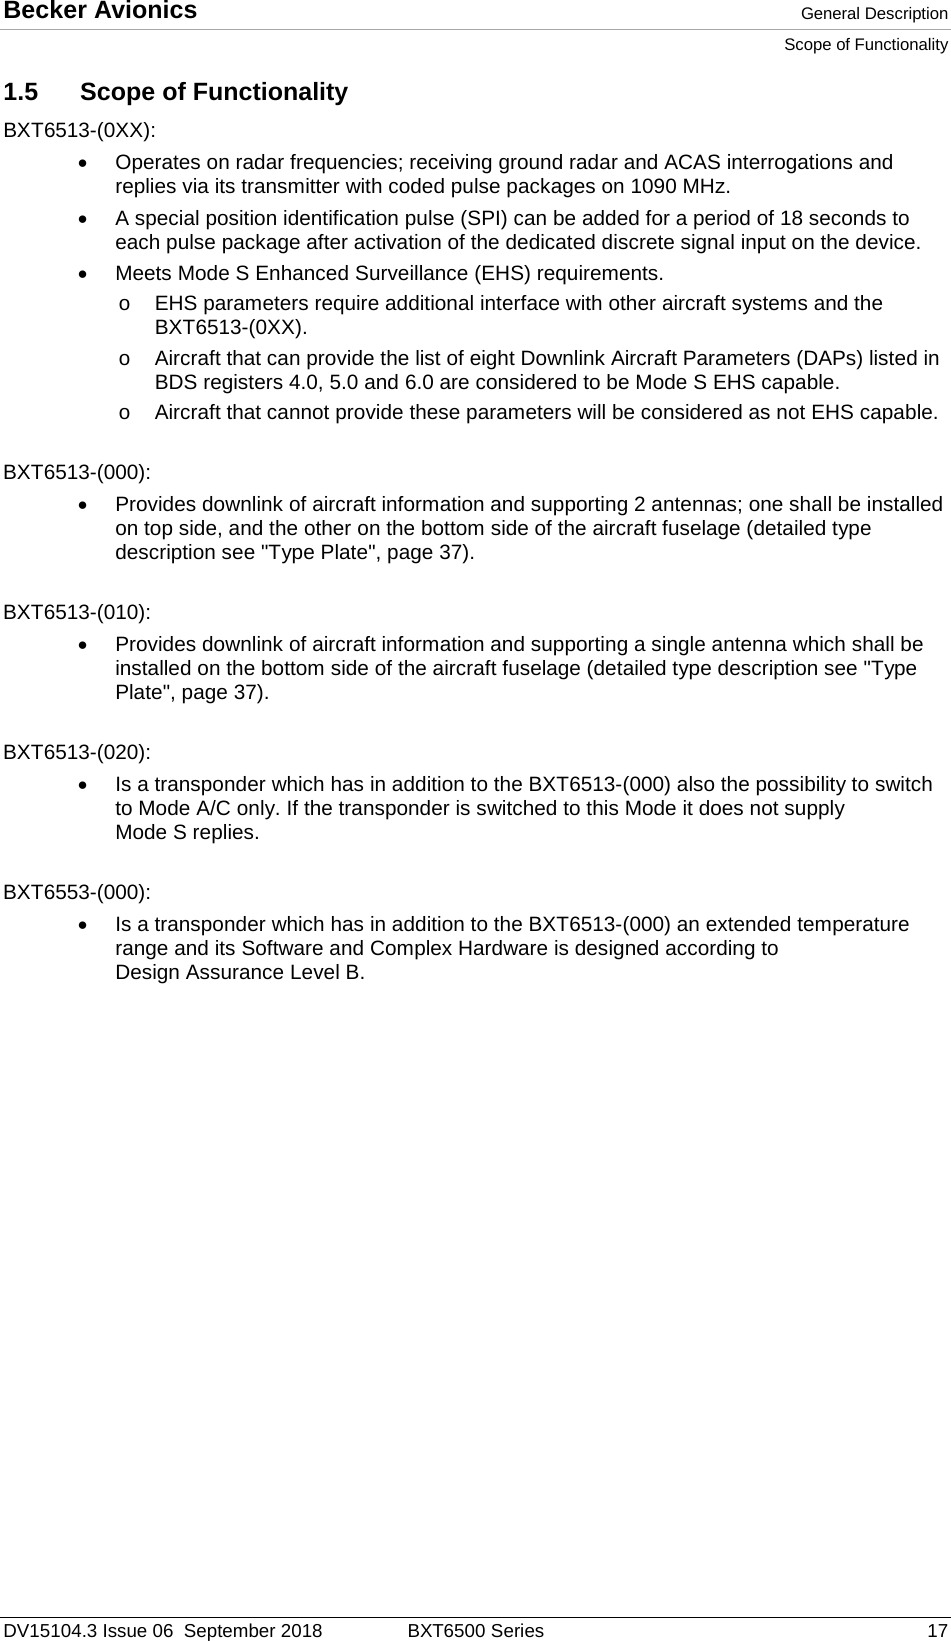 Becker Avionics  General Description Scope of Functionality  DV15104.3 Issue 06  September 2018 BXT6500 Series 17 1.5 Scope of Functionality BXT6513-(0XX): • Operates on radar frequencies; receiving ground radar and ACAS interrogations and replies via its transmitter with coded pulse packages on 1090 MHz.  • A special position identification pulse (SPI) can be added for a period of 18 seconds to each pulse package after activation of the dedicated discrete signal input on the device. •  Meets Mode S Enhanced Surveillance (EHS) requirements.  o EHS parameters require additional interface with other aircraft systems and the BXT6513-(0XX).  o Aircraft that can provide the list of eight Downlink Aircraft Parameters (DAPs) listed in BDS registers 4.0, 5.0 and 6.0 are considered to be Mode S EHS capable.  o Aircraft that cannot provide these parameters will be considered as not EHS capable.  BXT6513-(000): • Provides downlink of aircraft information and supporting 2 antennas; one shall be installed on top side, and the other on the bottom side of the aircraft fuselage (detailed type description see &quot;Type Plate&quot;, page 37).   BXT6513-(010): • Provides downlink of aircraft information and supporting a single antenna which shall be installed on the bottom side of the aircraft fuselage (detailed type description see &quot;Type Plate&quot;, page 37).  BXT6513-(020): •  Is a transponder which has in addition to the BXT6513-(000) also the possibility to switch to Mode A/C only. If the transponder is switched to this Mode it does not supply Mode S replies.  BXT6553-(000): •  Is a transponder which has in addition to the BXT6513-(000) an extended temperature range and its Software and Complex Hardware is designed according to Design Assurance Level B.    